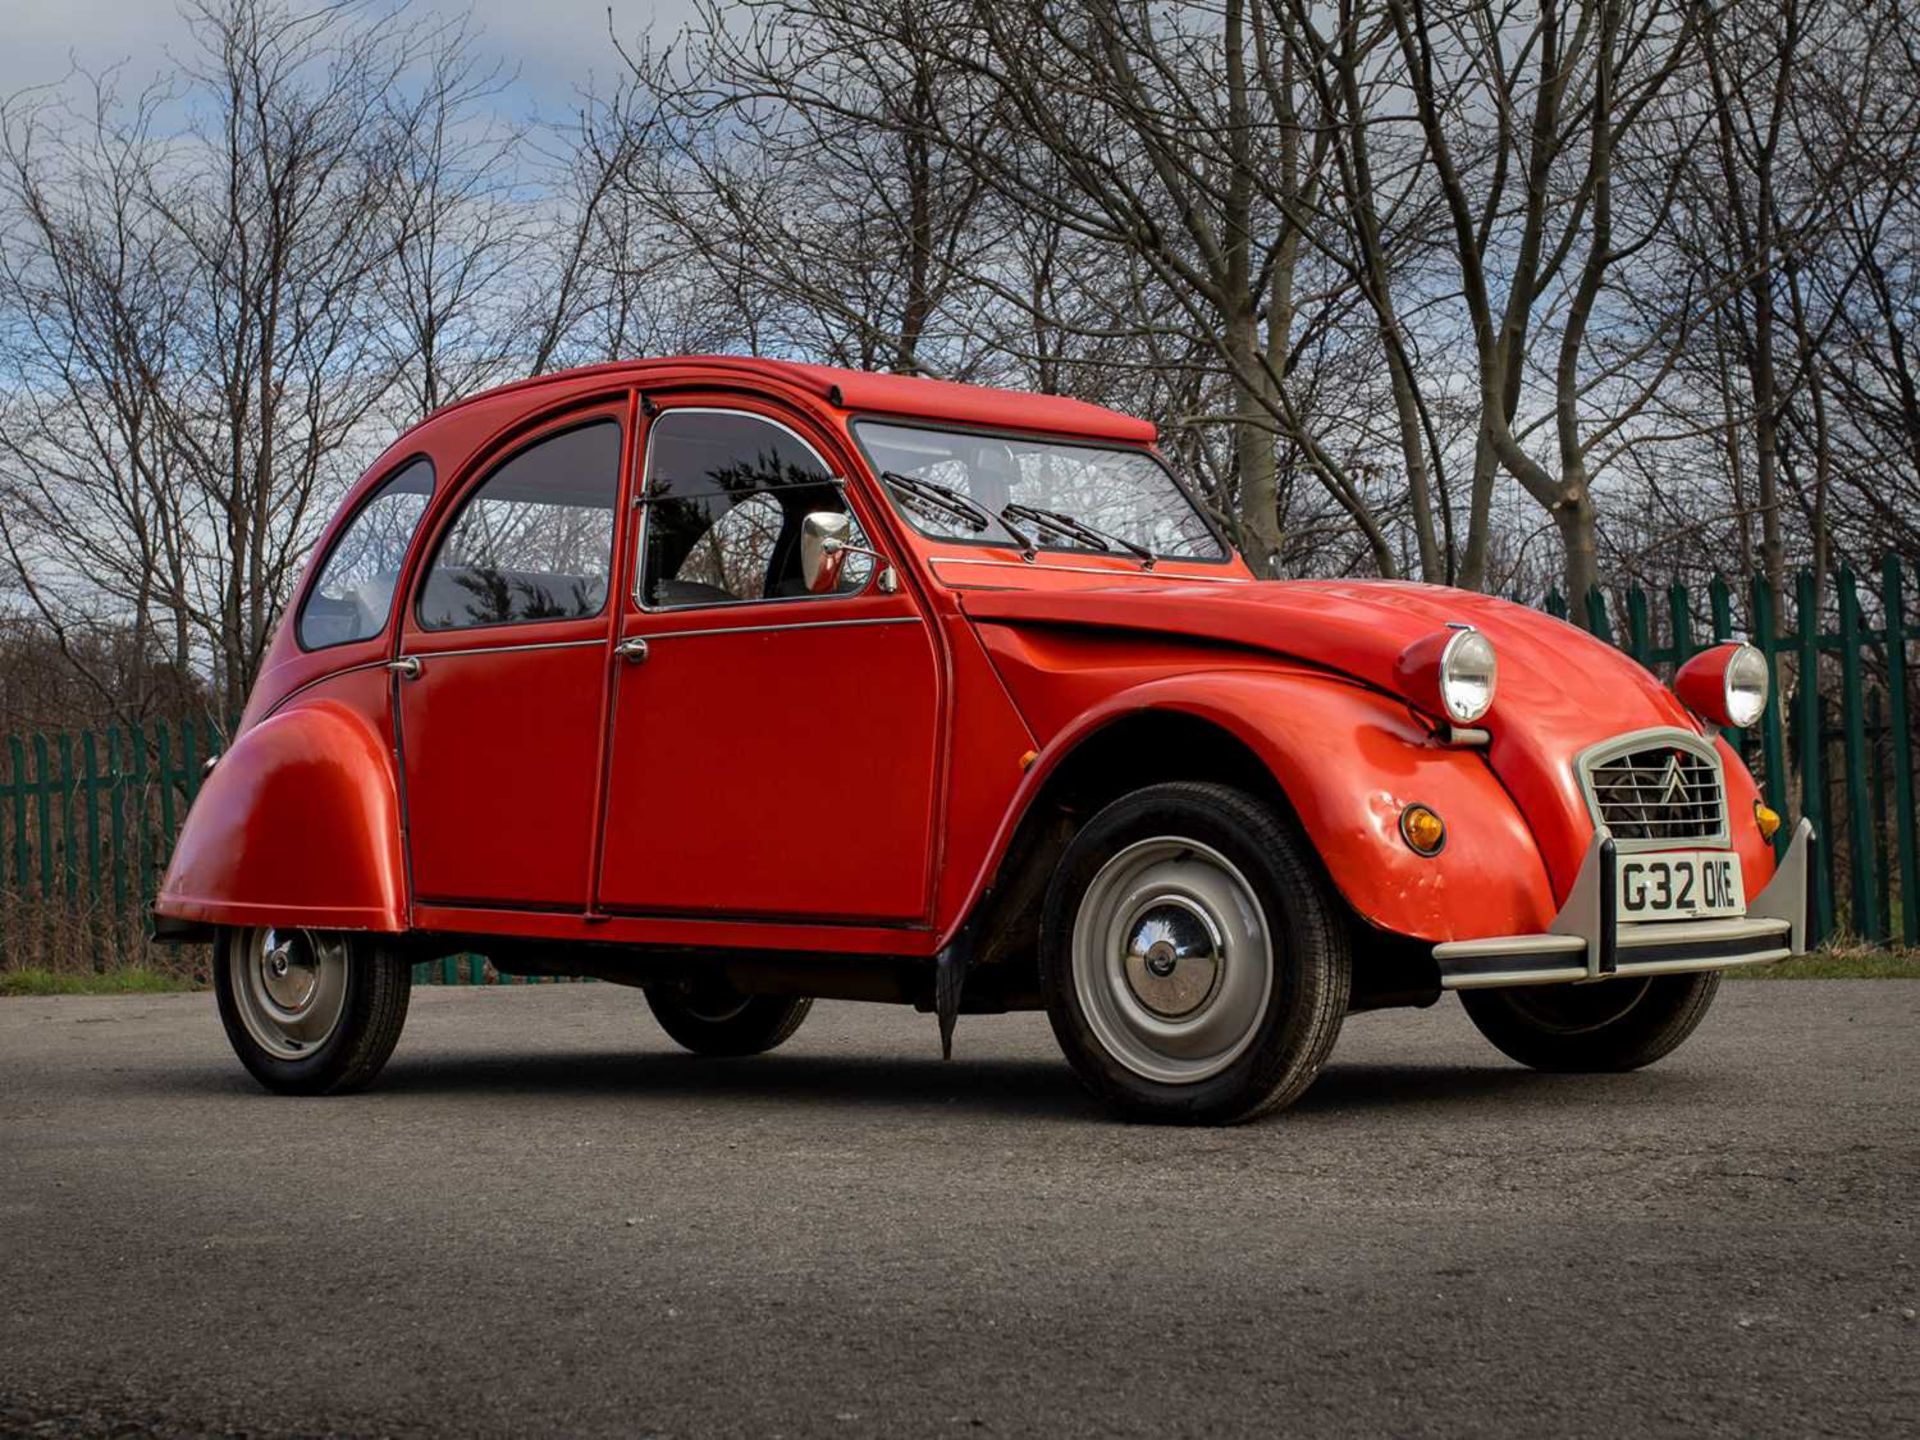 1989 Citroën 2CV6 Spécial Believed to have covered a credible 15,000 miles